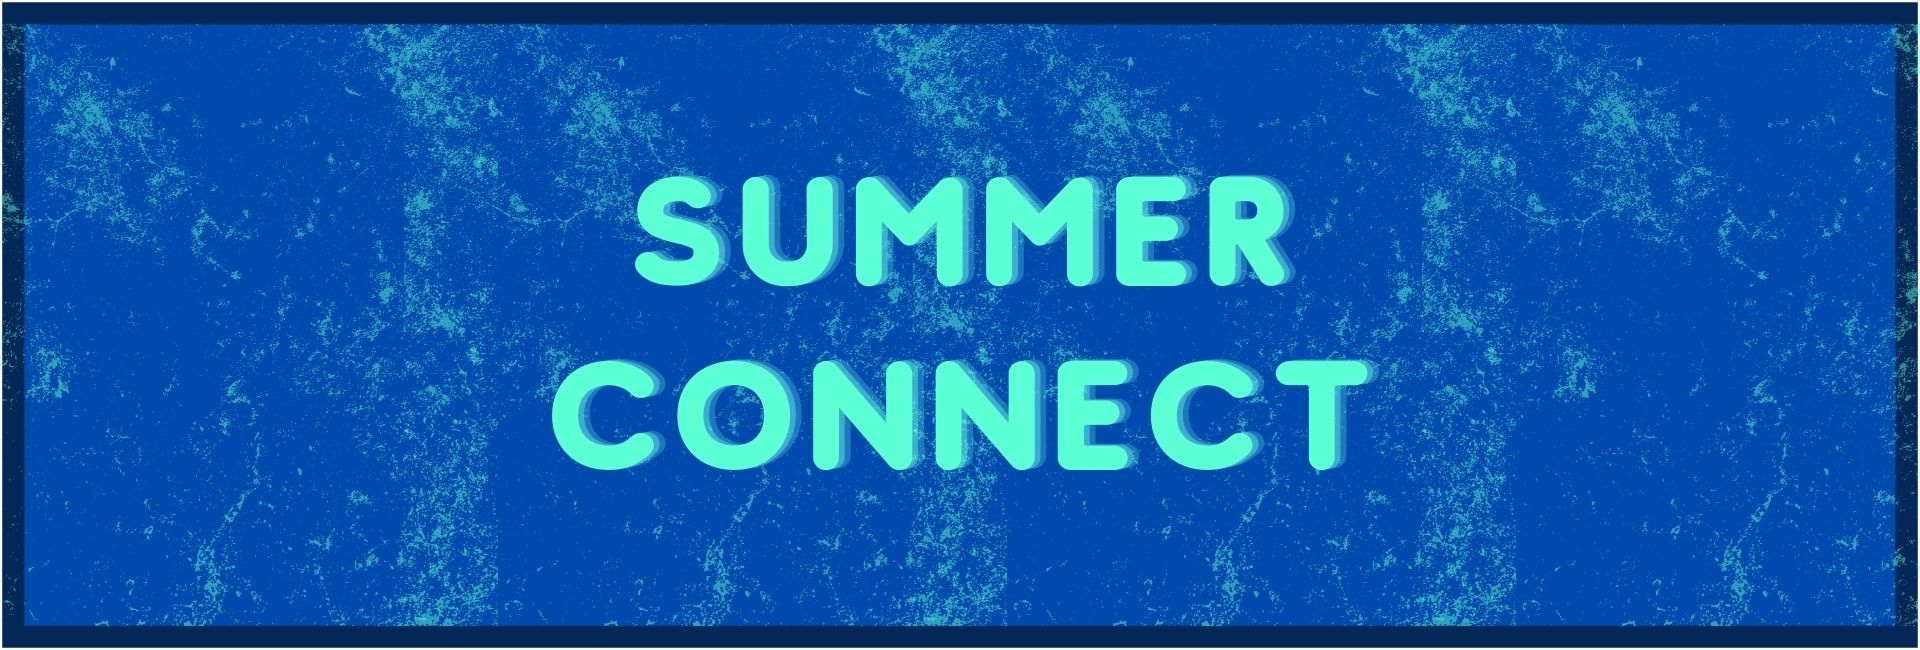 Summer CONNECT Web